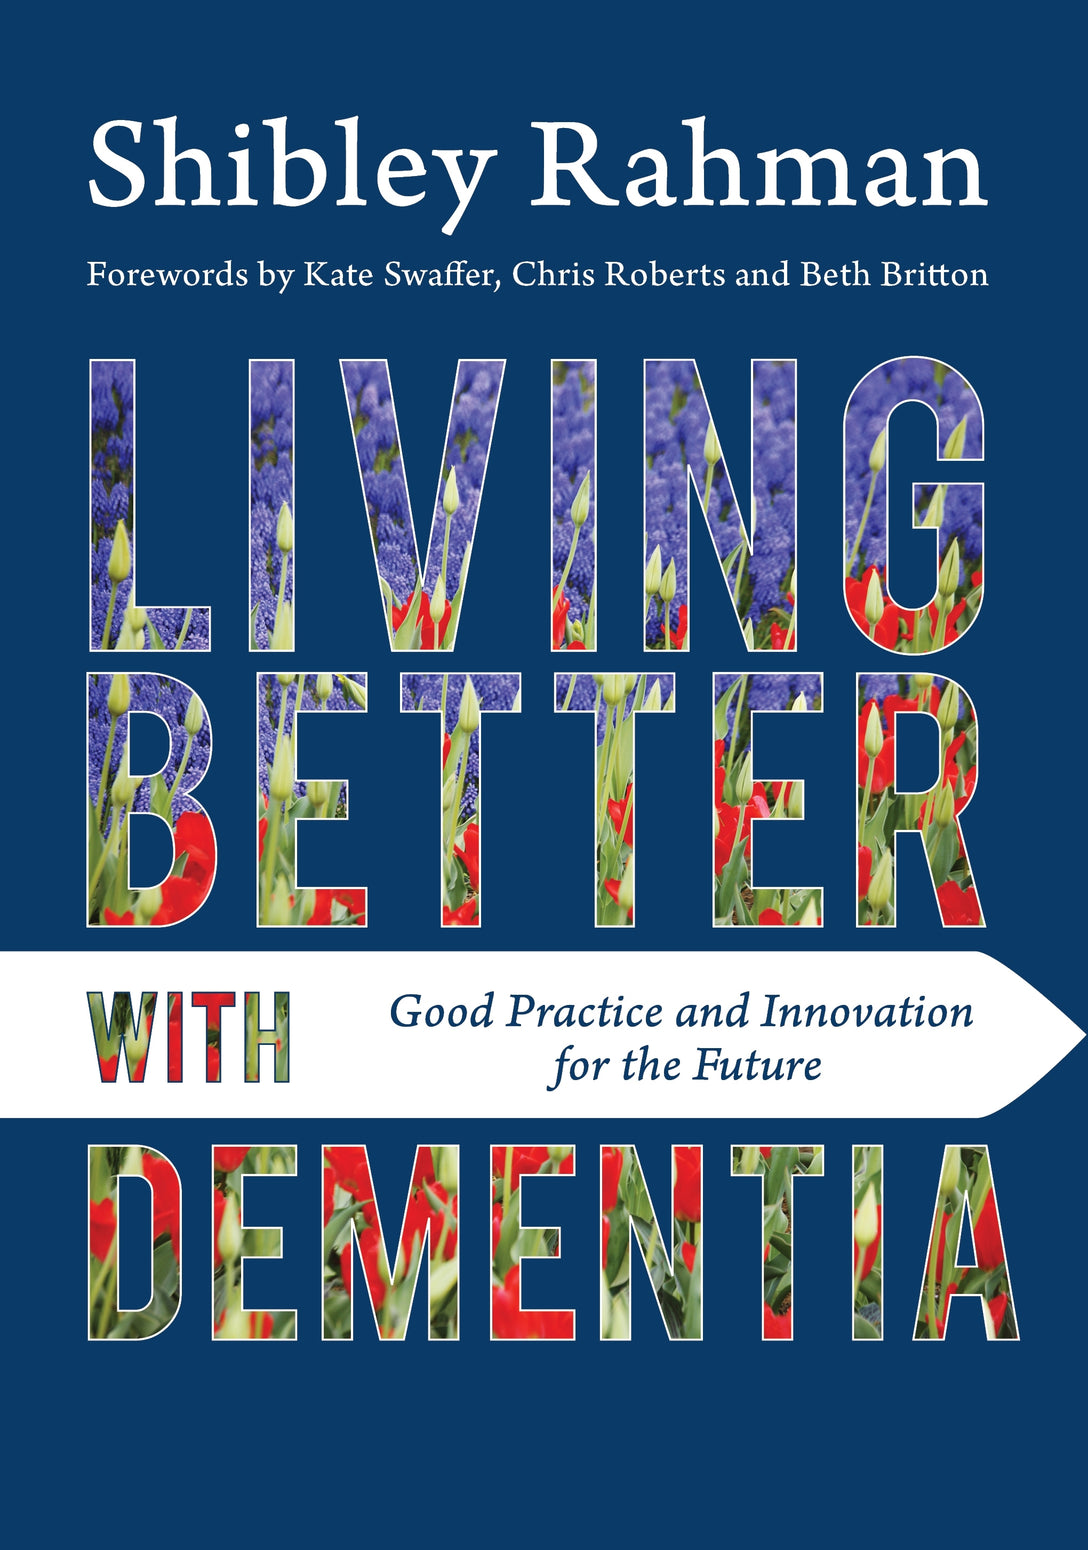 Living Better with Dementia by Beth Britton, Shibley Rahman, Chris Roberts, Kate Swaffer